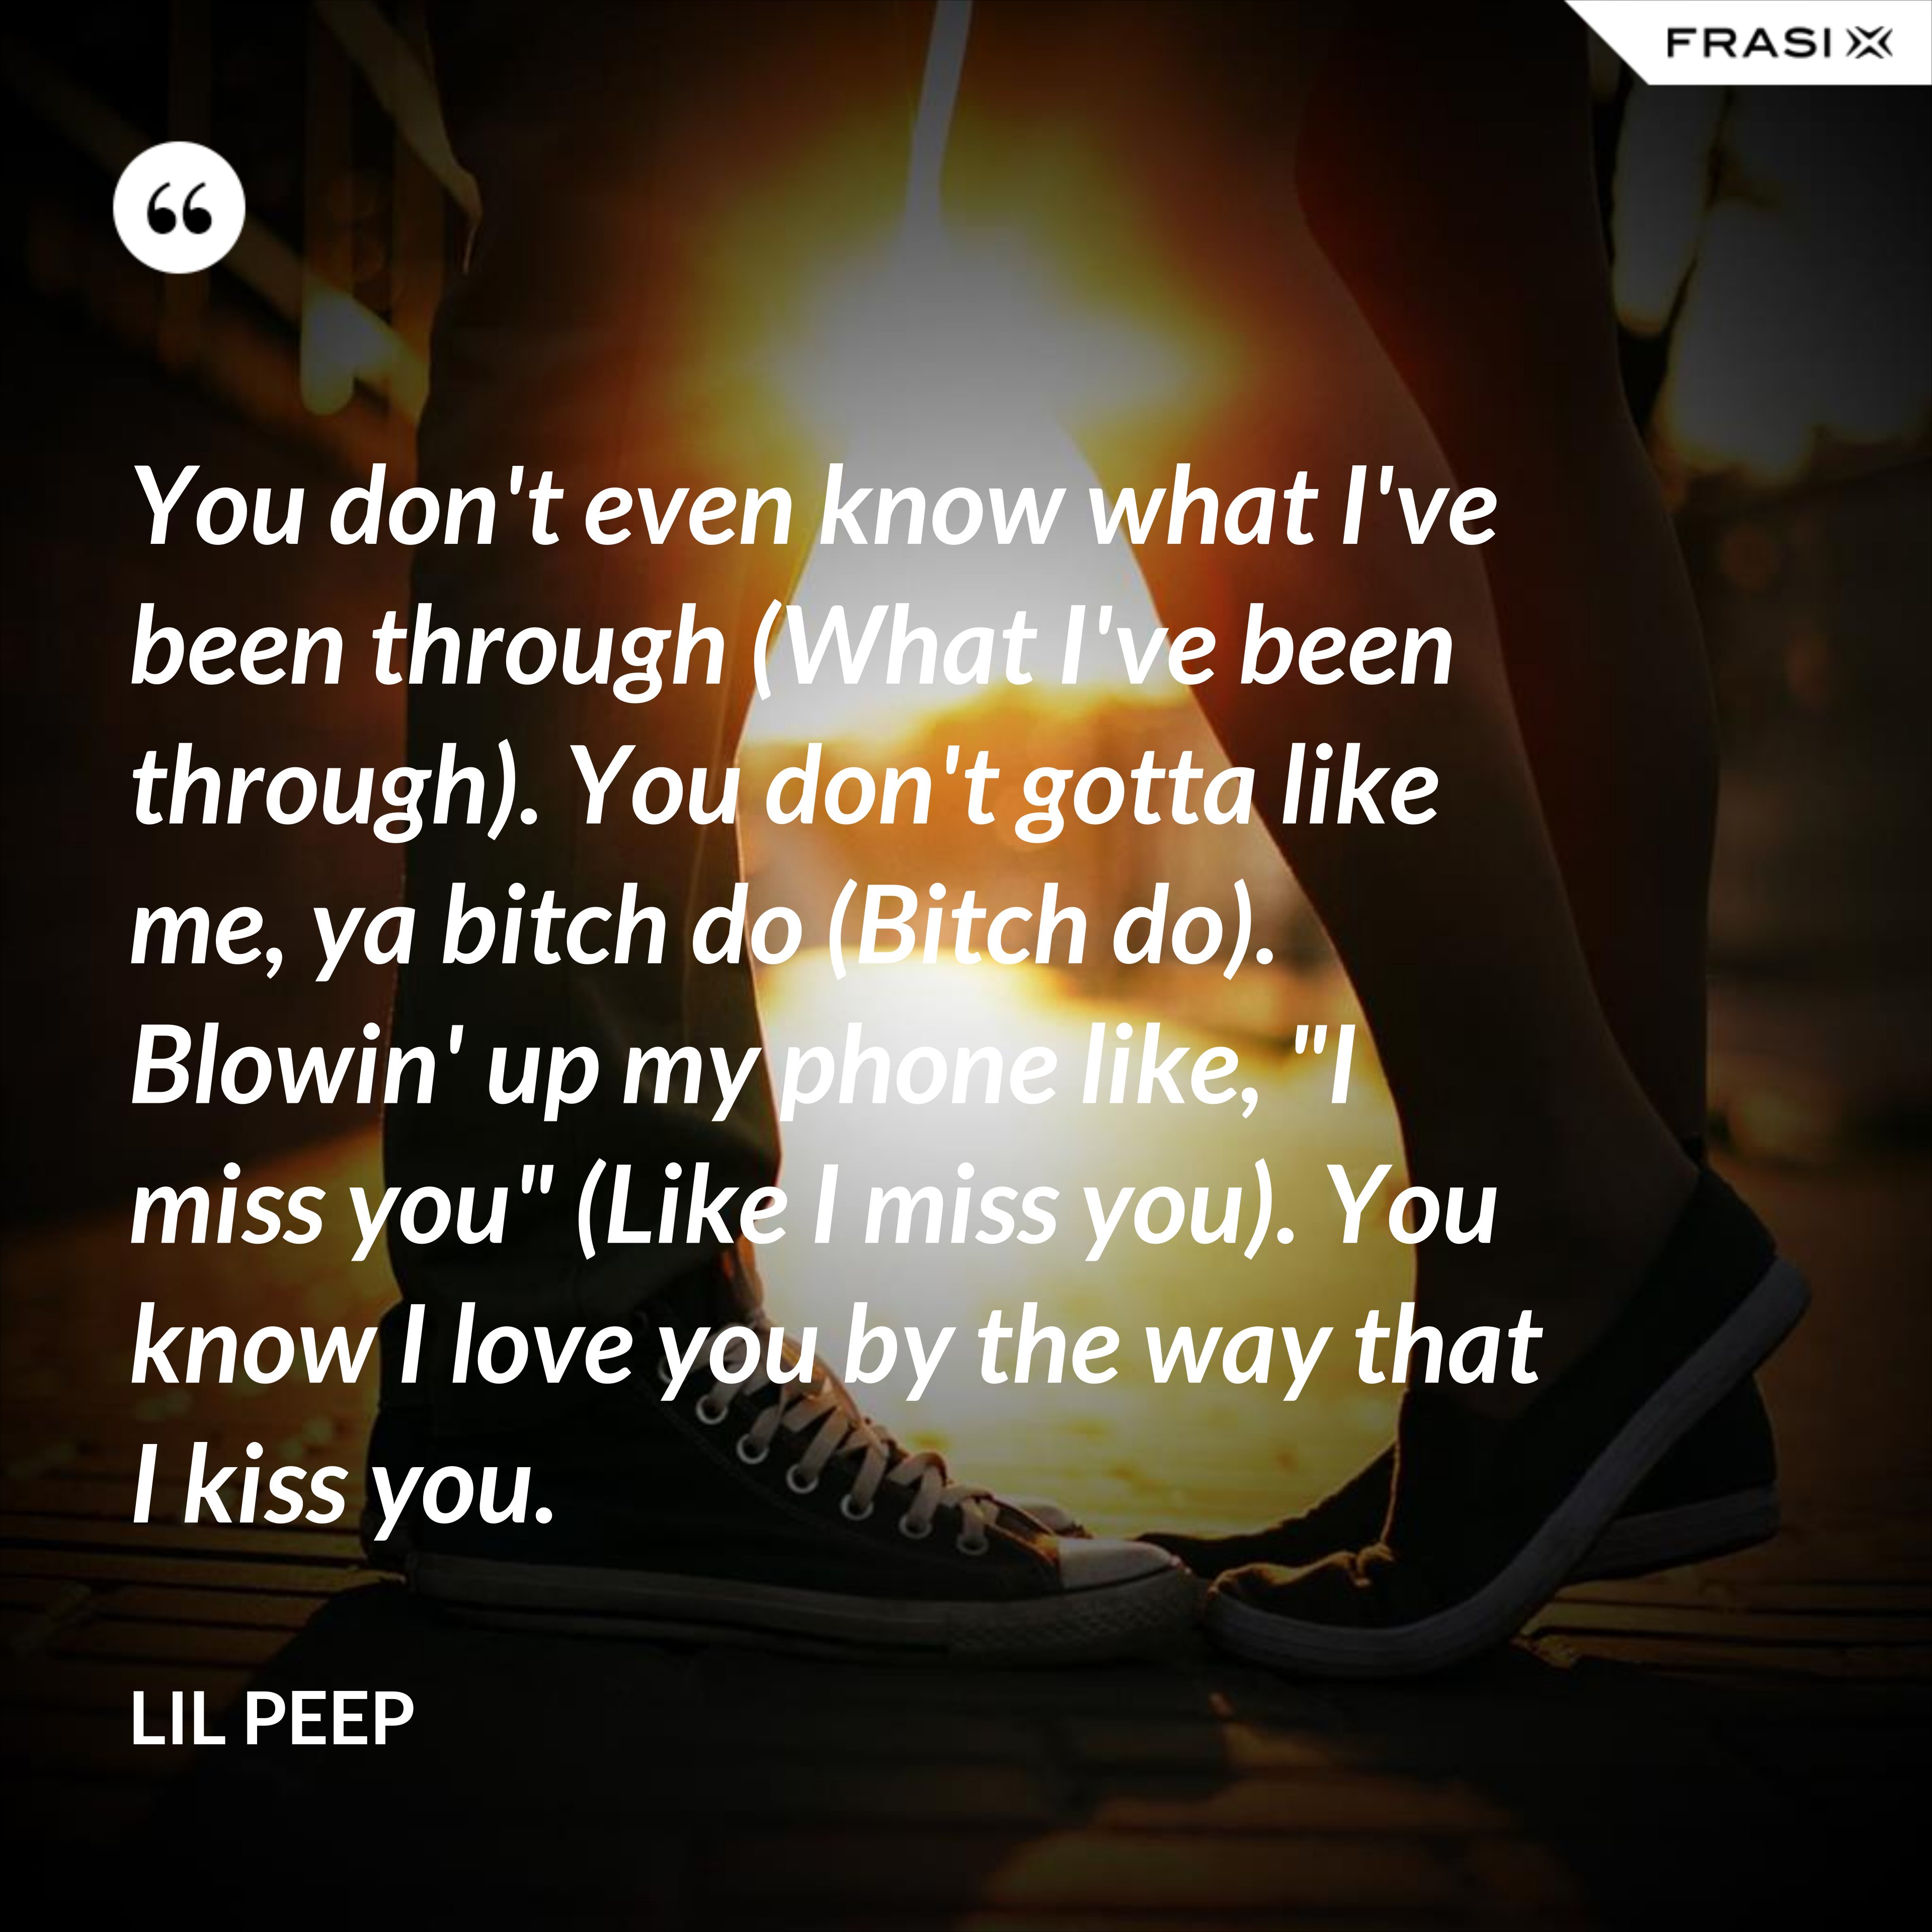 You don't even know what I've been through (What I've been through). You don't gotta like me, ya bitch do (Bitch do). Blowin' up my phone like, "I miss you" (Like I miss you). You know I love you by the way that I kiss you. - Lil Peep